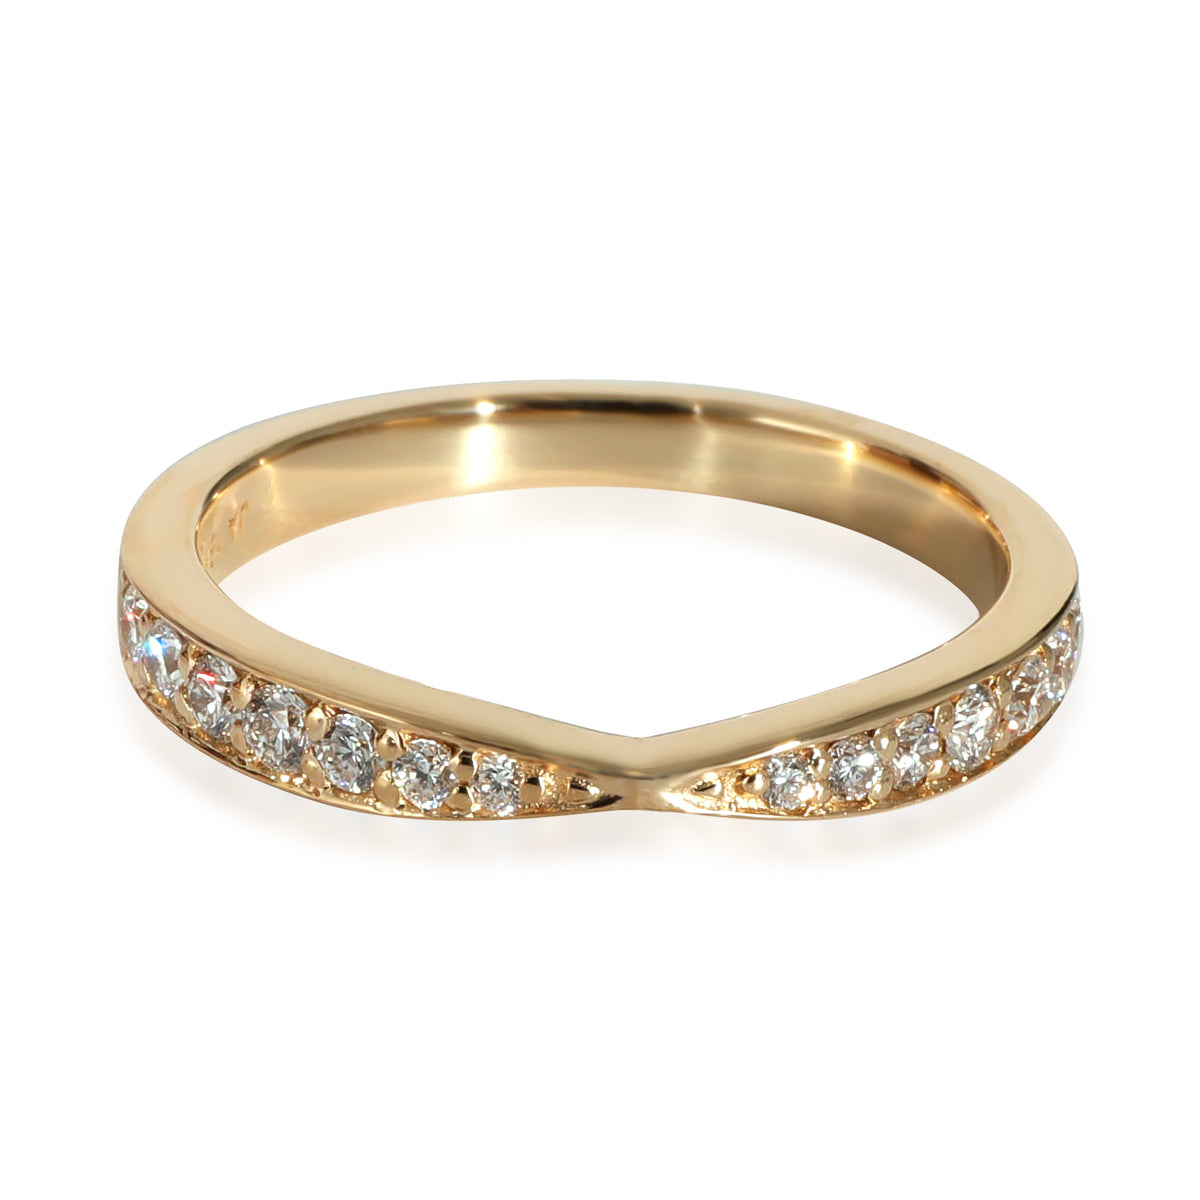 James Allen Tapered Pave Band in 18k Yellow Gold 0.21 CTW